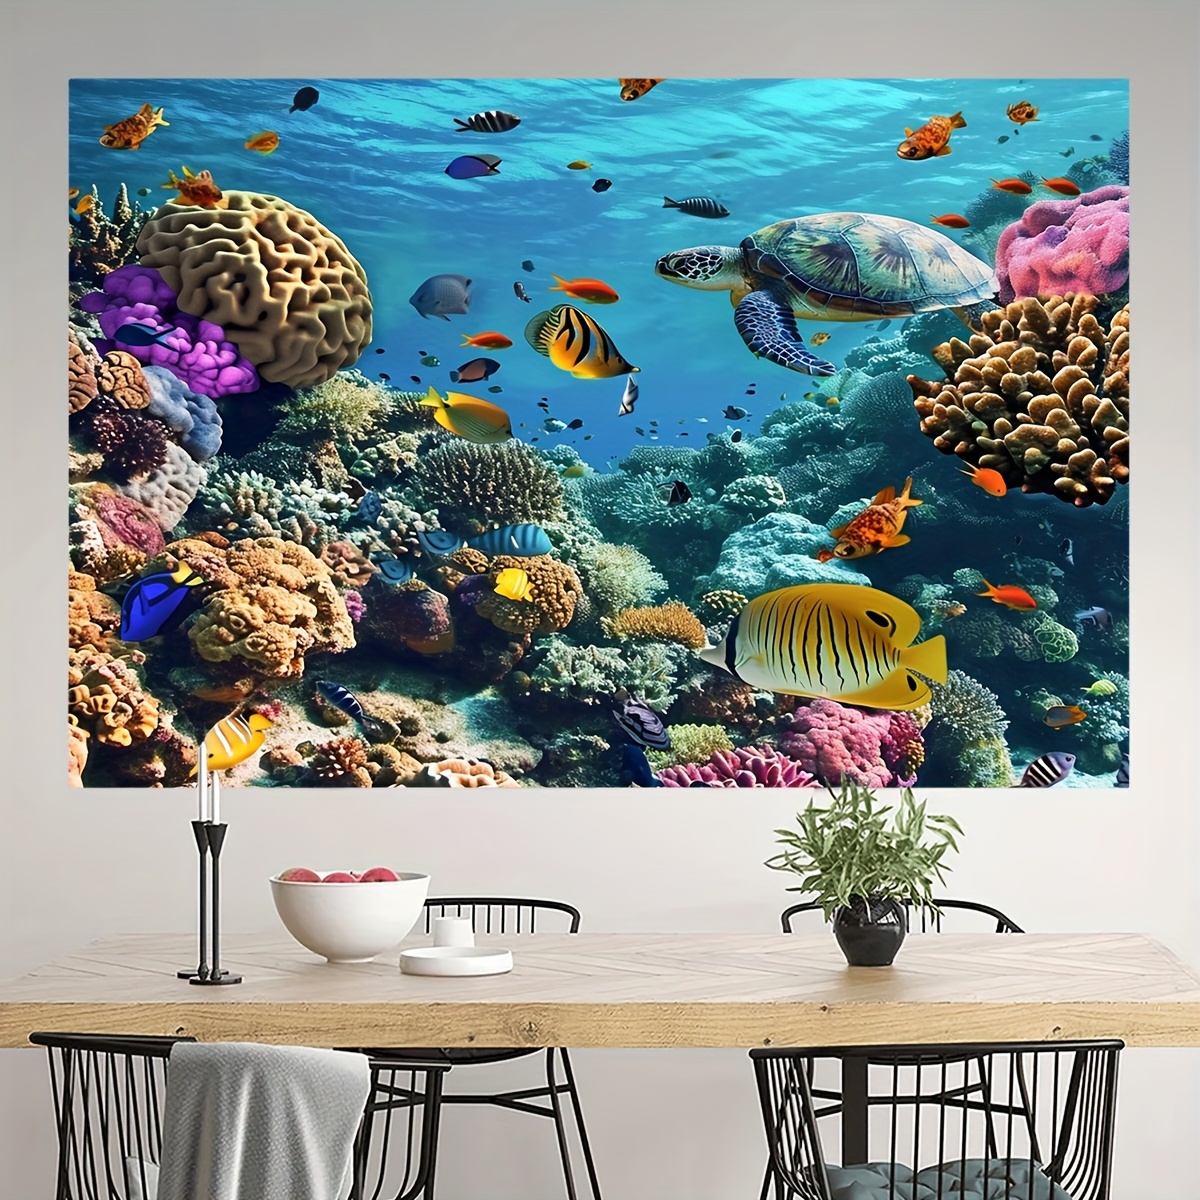 Beautiful aquarium on table against color background :: Stock Photography  Agency :: Pixel-Shot Studio